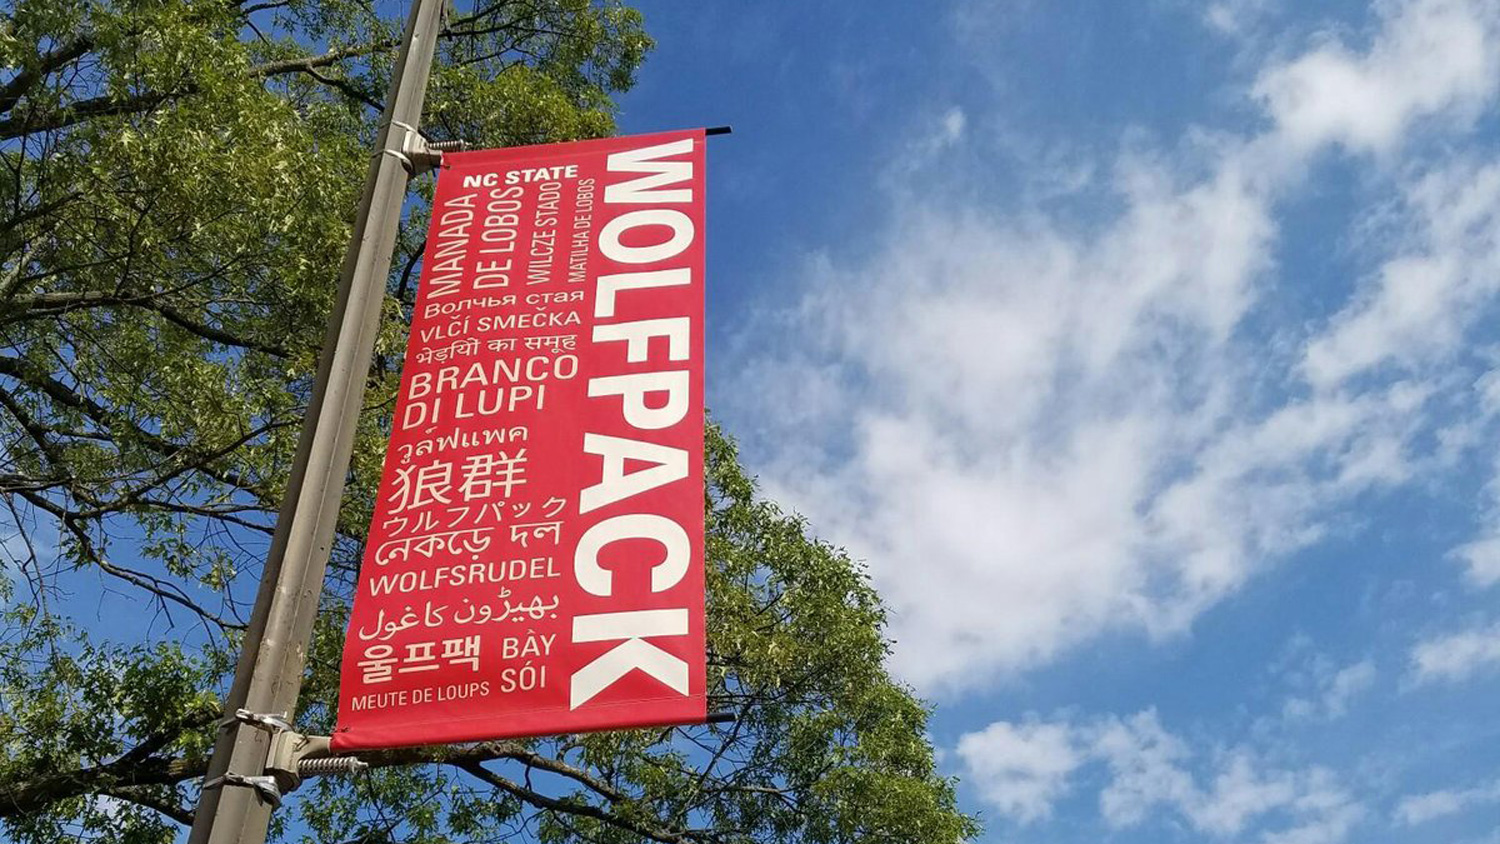 Wolfpack sign